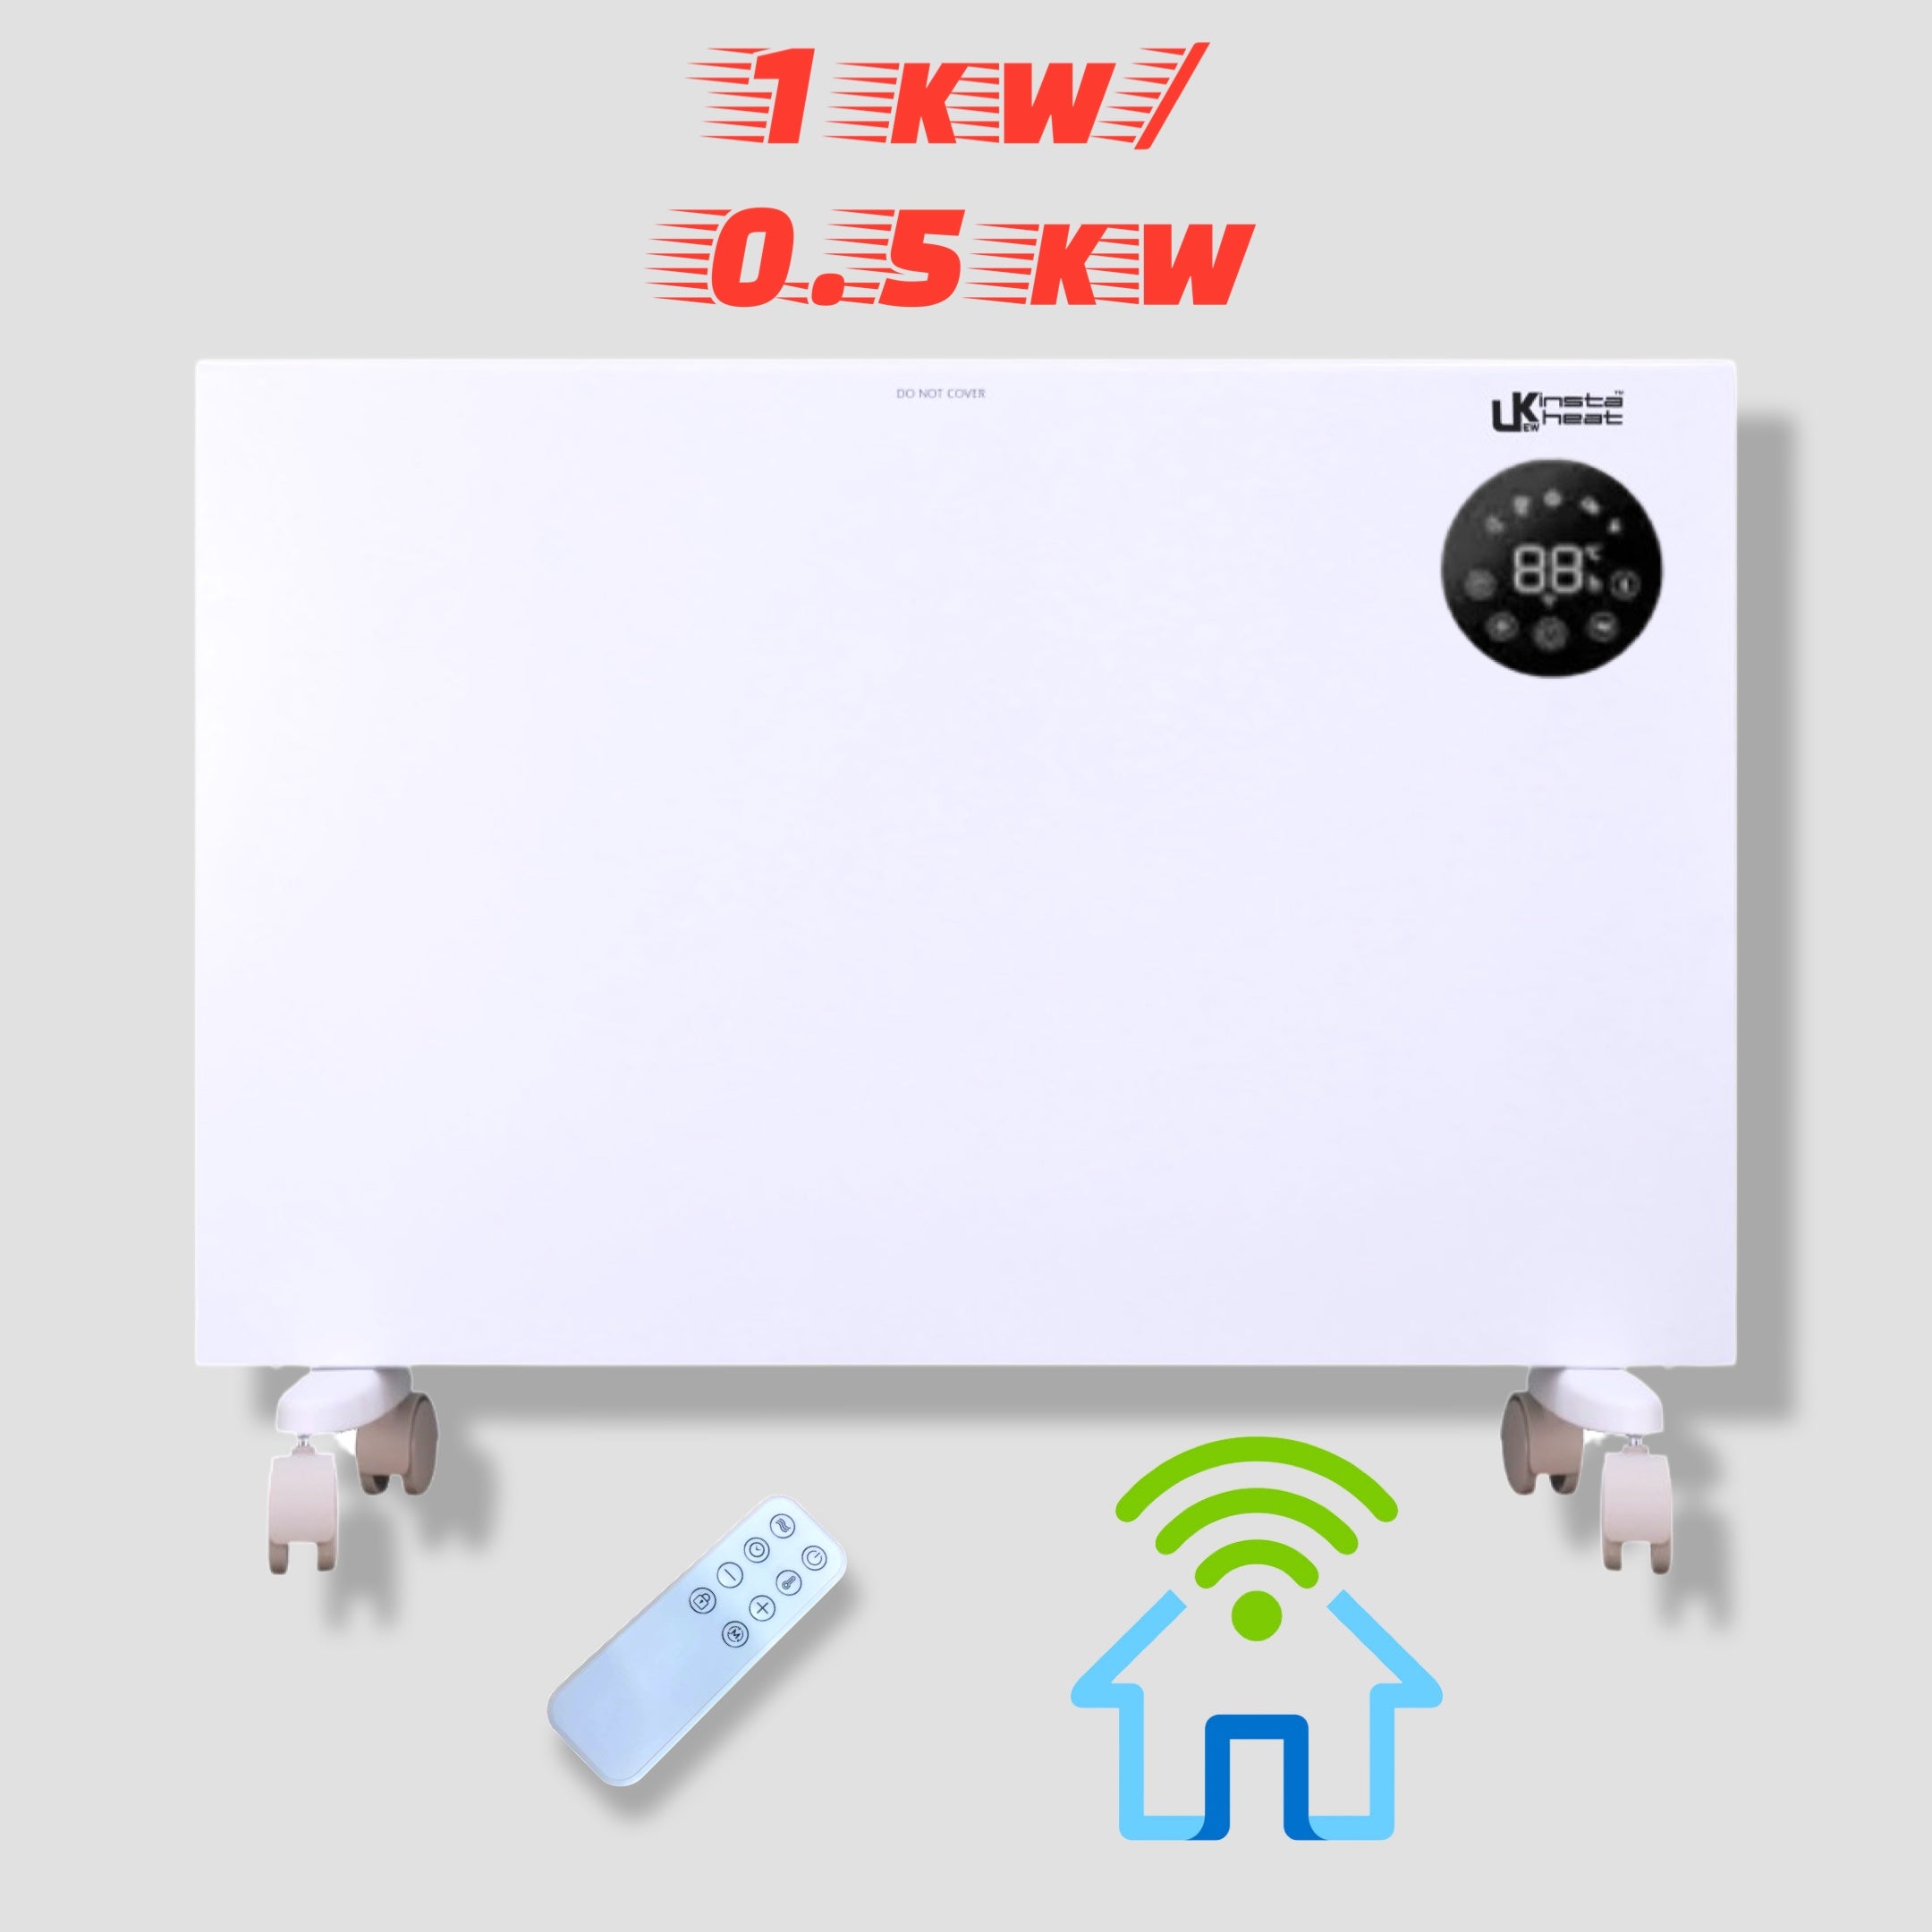 Wall Heater Wifi Electric Convector Panel  White 24H 7 Day Thermostat 0.5Kw/1/KW - Light fixtures UK